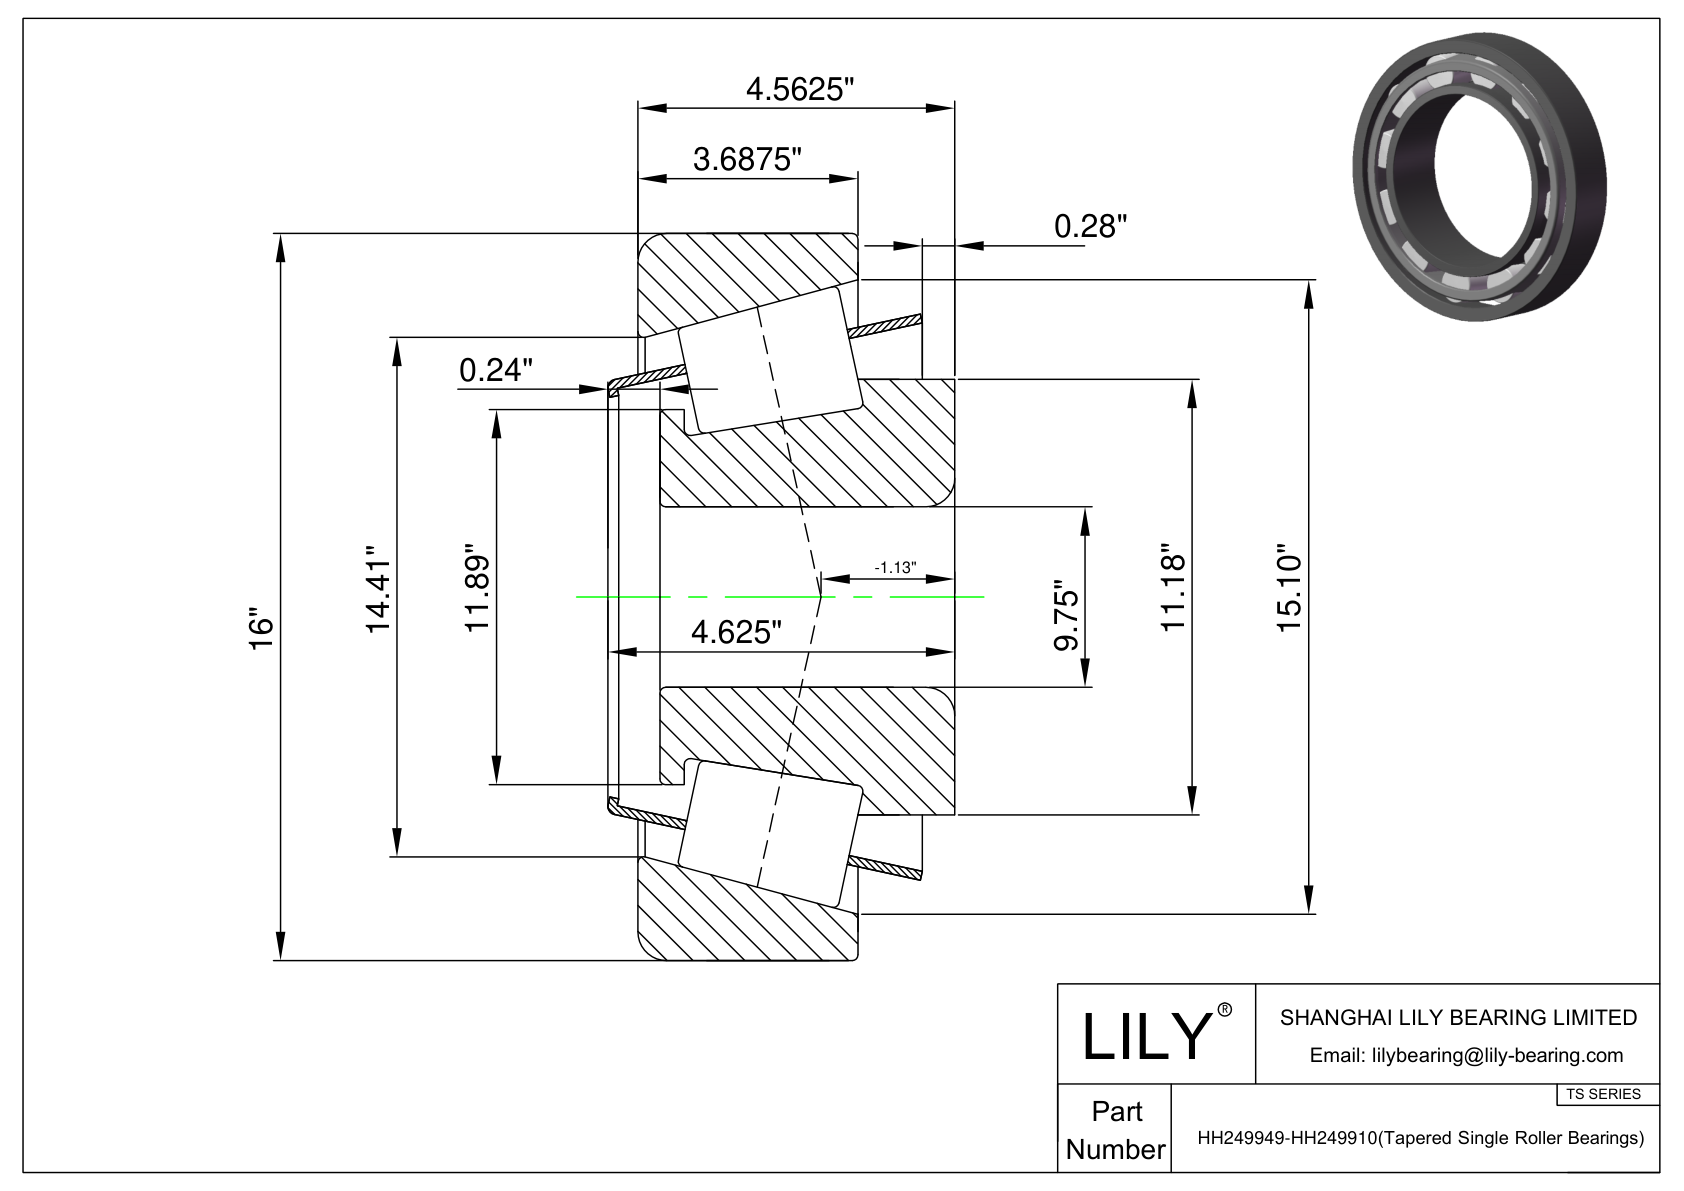 HH249949-HH249910 TS (Tapered Single Roller Bearings) (Imperial) cad drawing